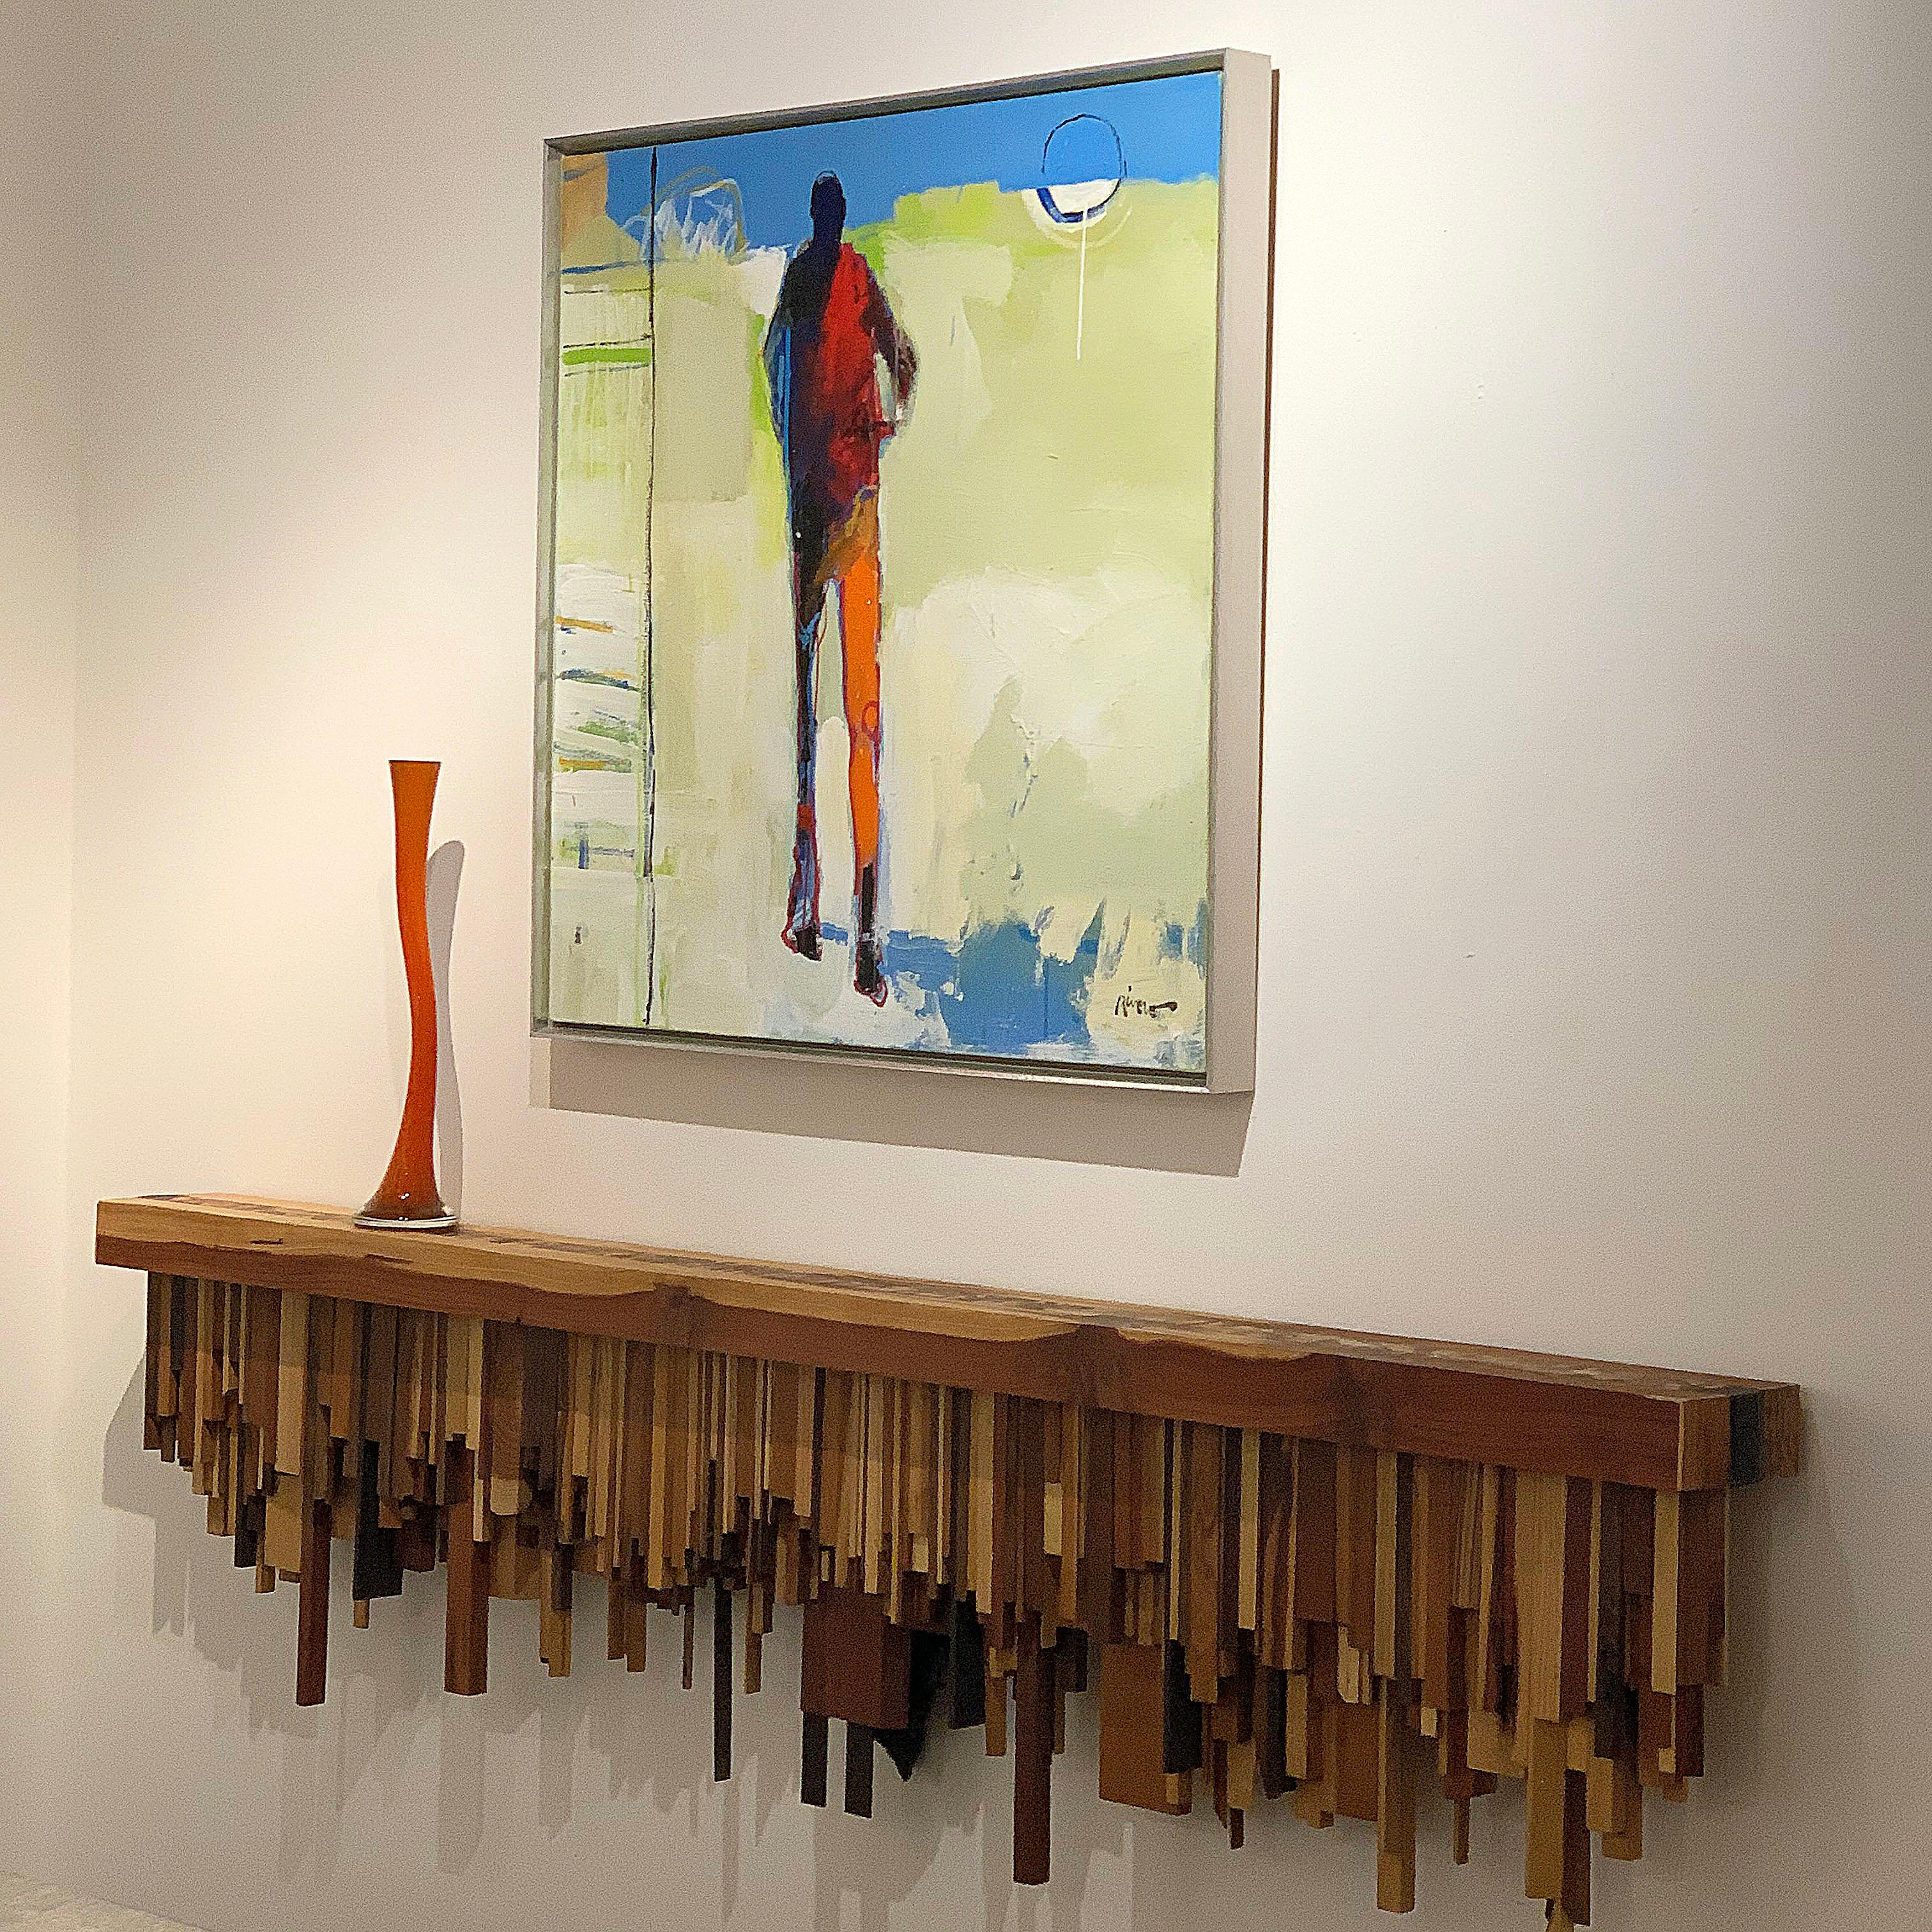 Mixed-media Long Mixed Wood Cityscape Shelf or Mantel by Artist Ben Darby, 2019 1